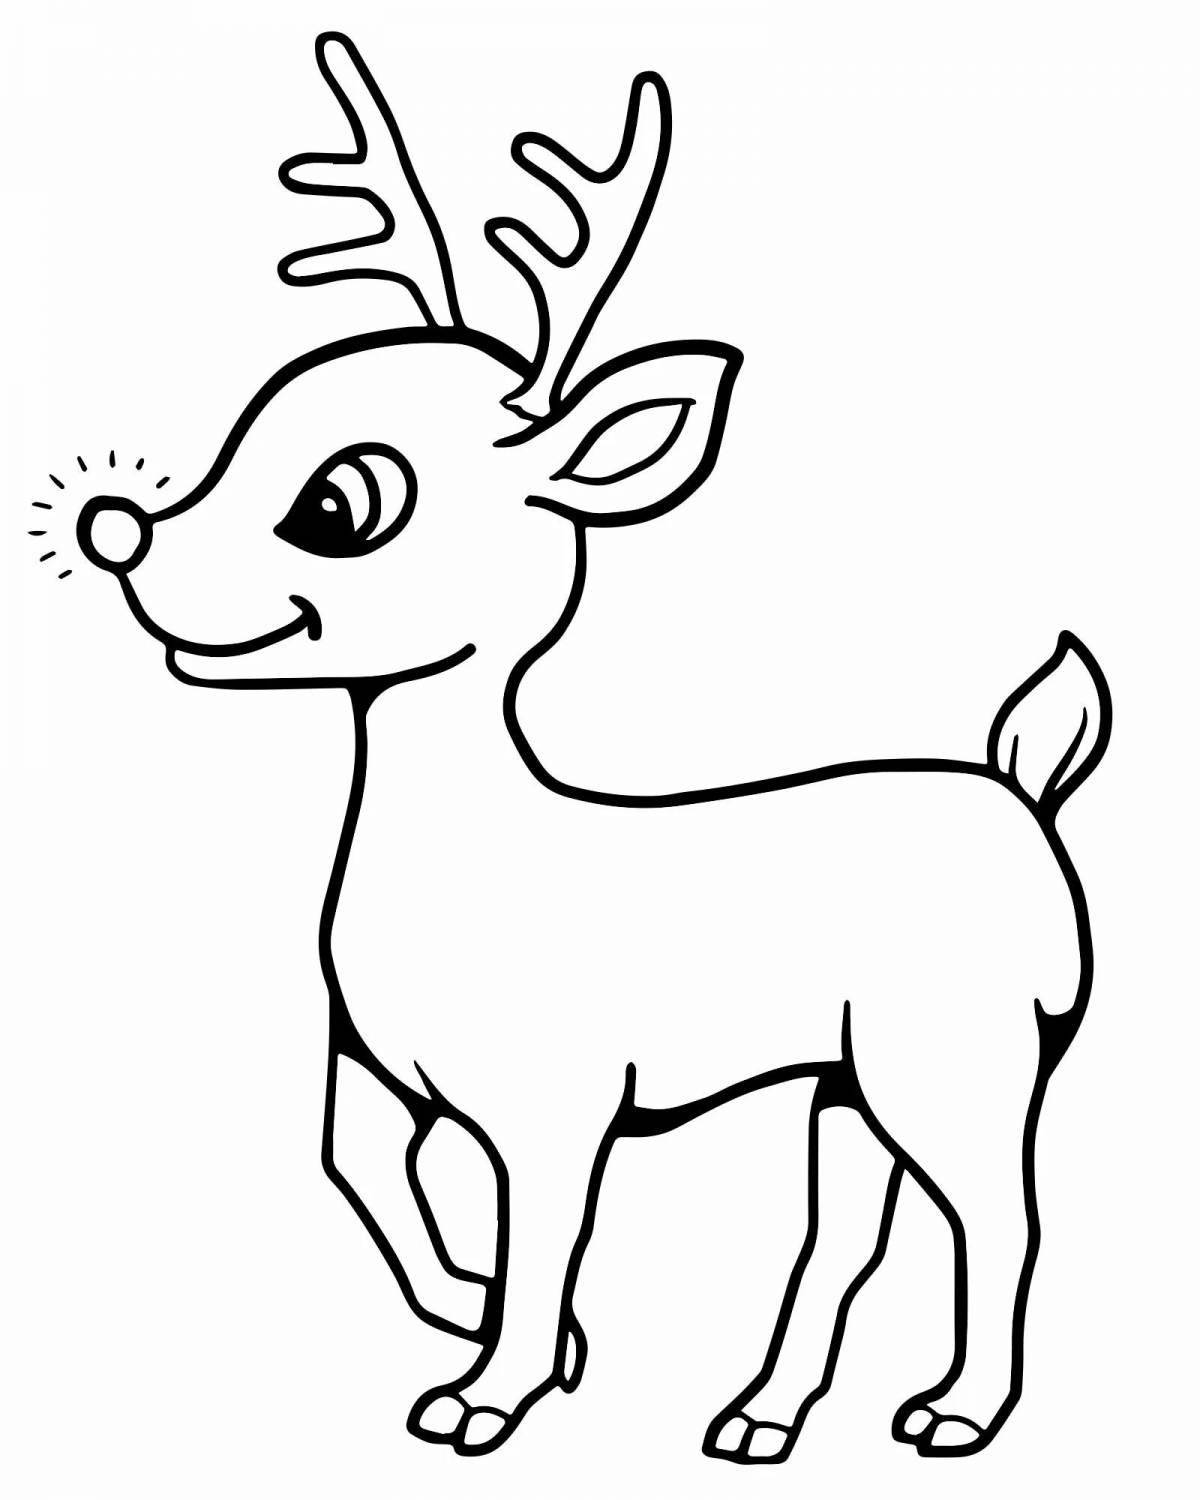 Adorable Christmas Reindeer Coloring Book for Kids